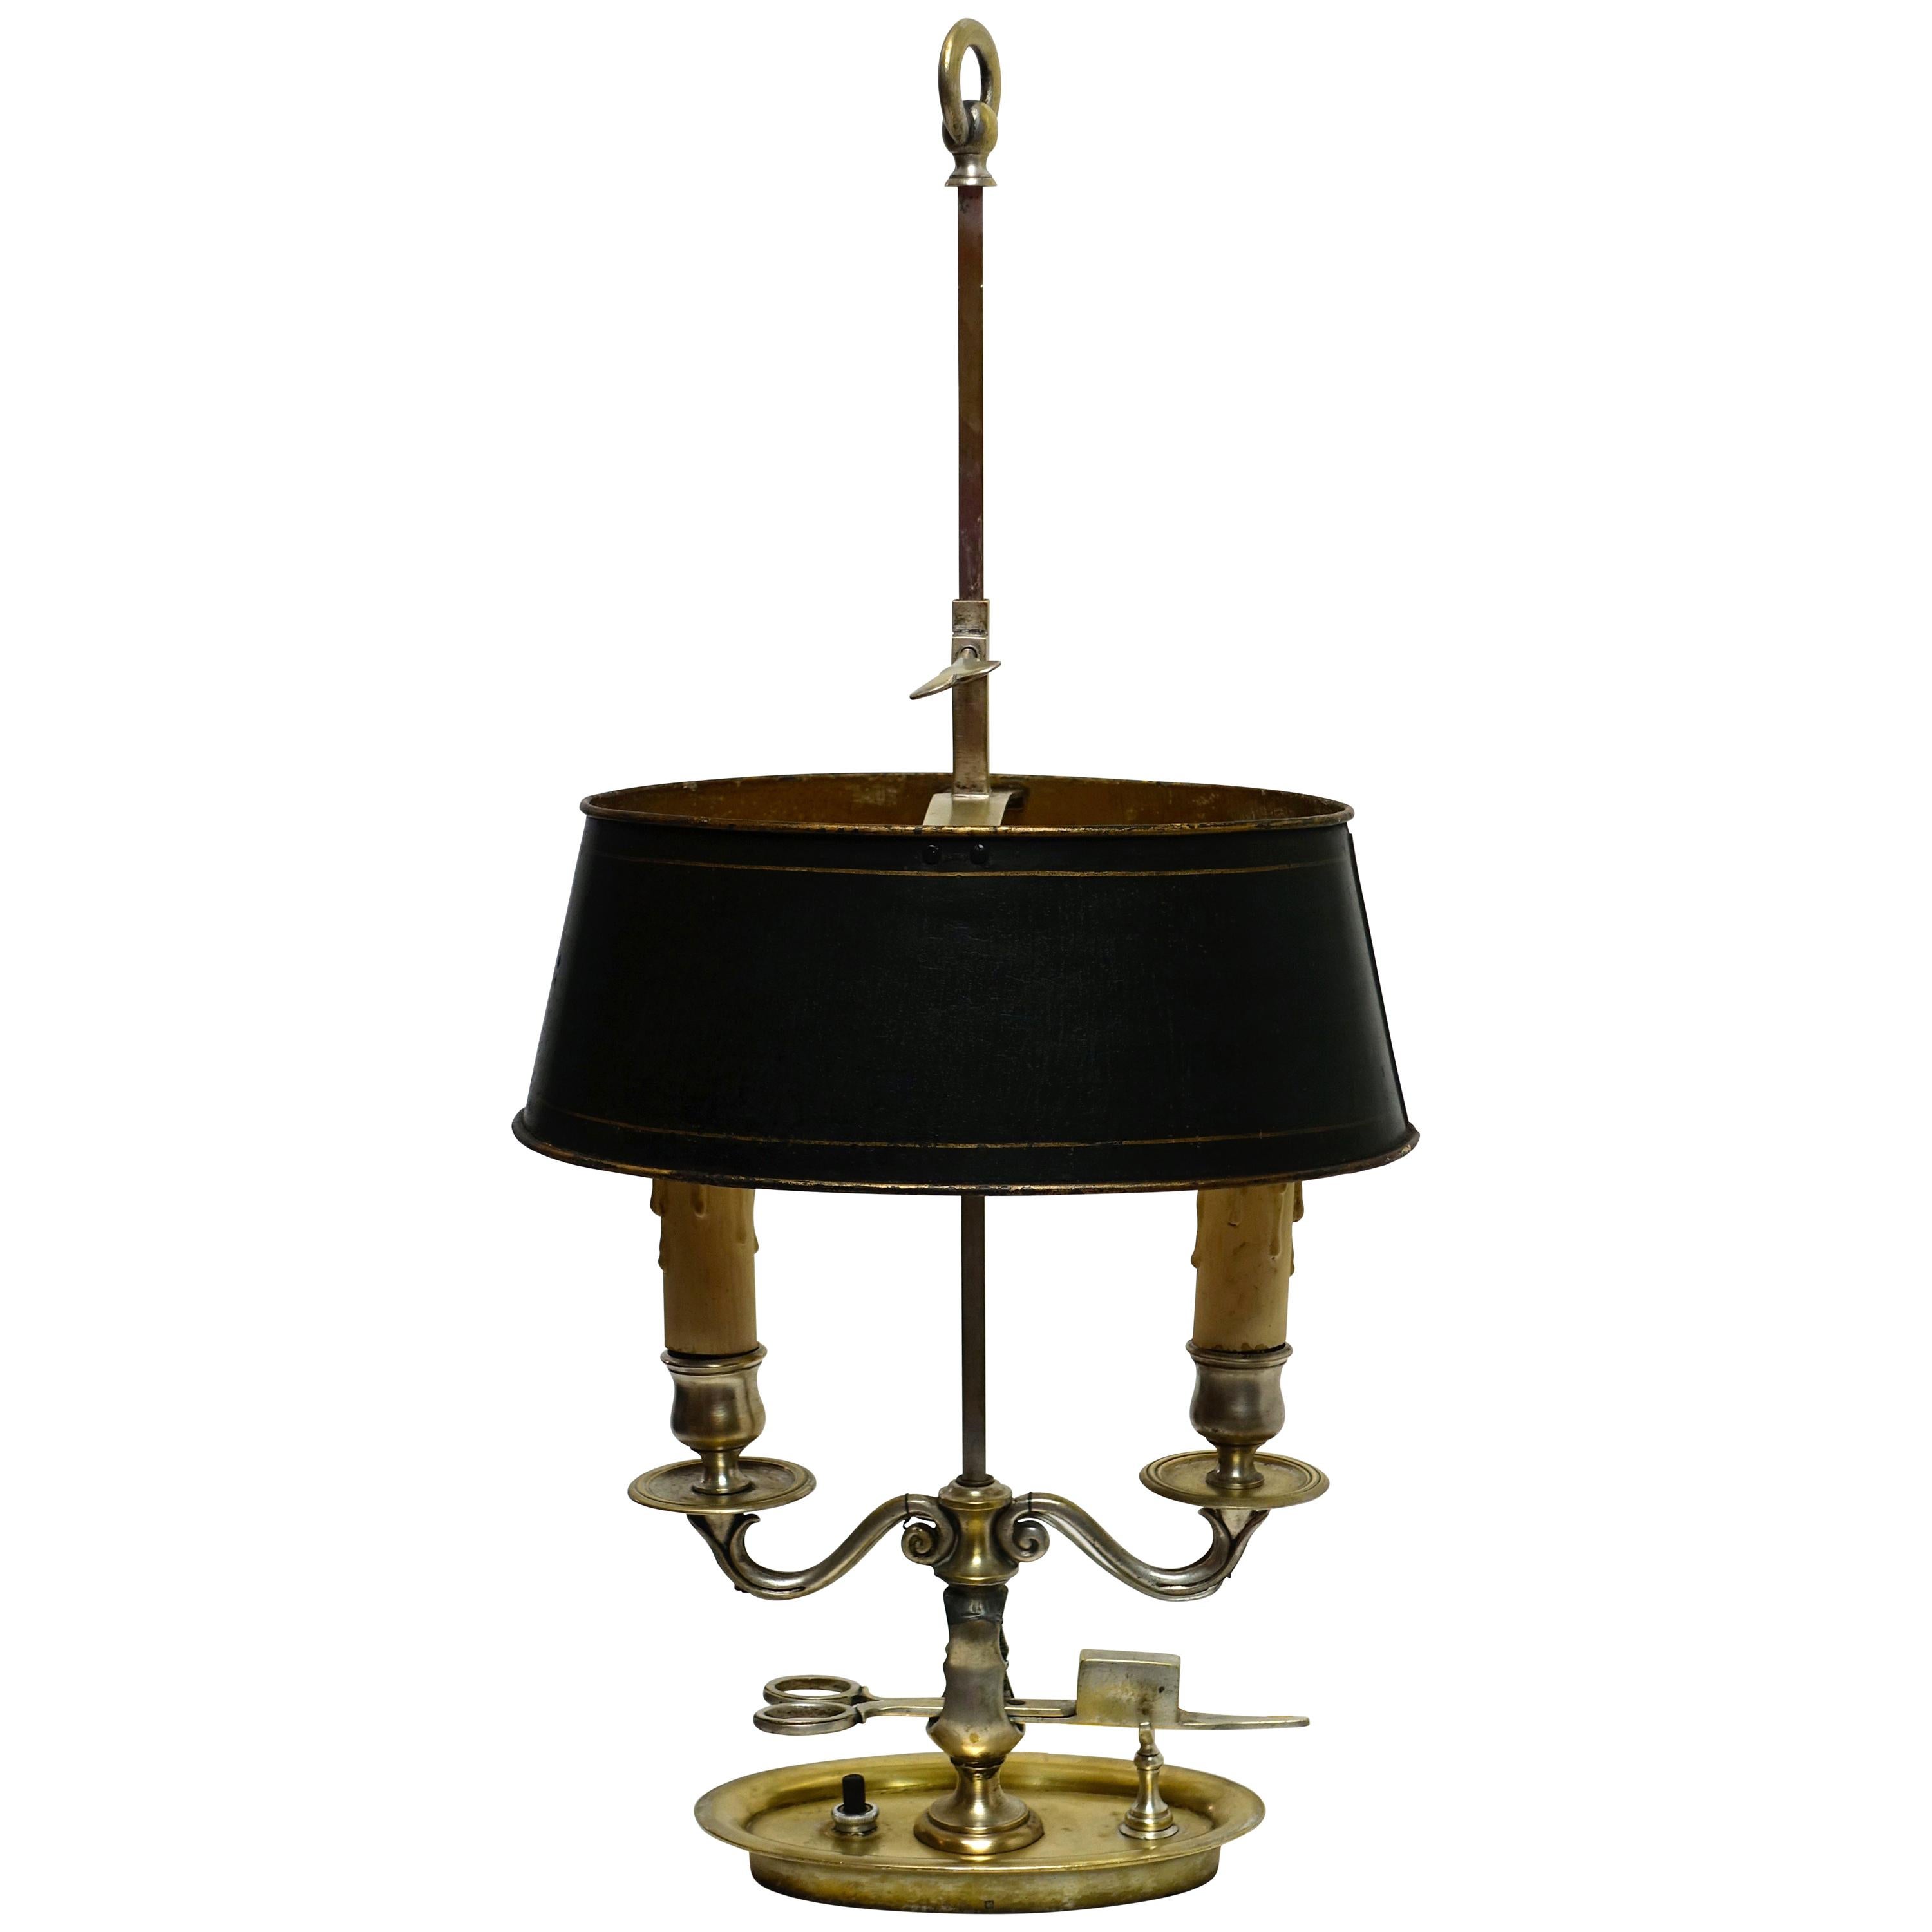 French Empire Nickel Plated Brass Bouillotte Lamp, Early 19th Century For Sale